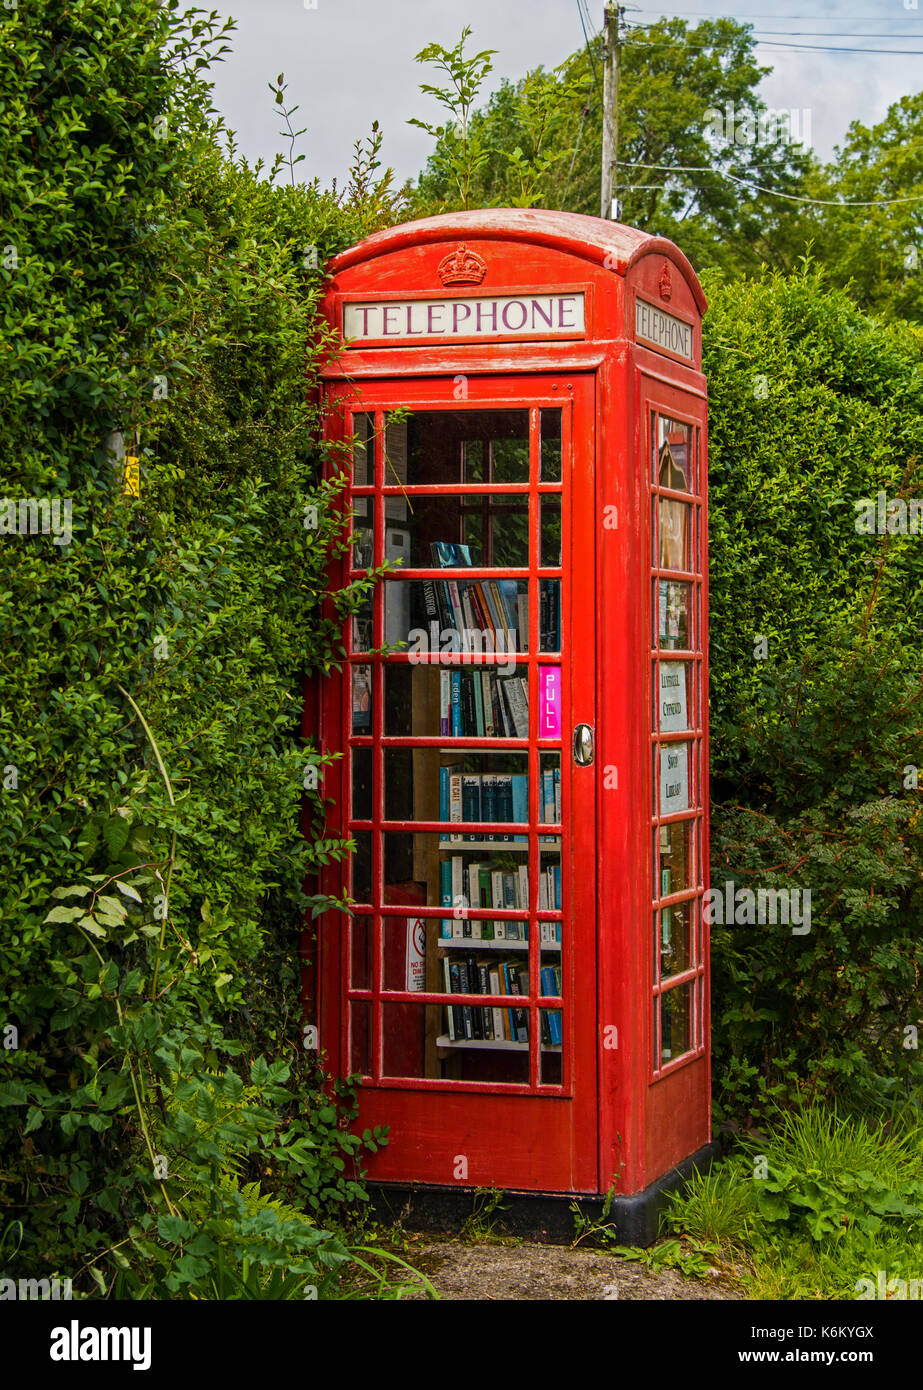 Library in an old telephone box. Stock Photo